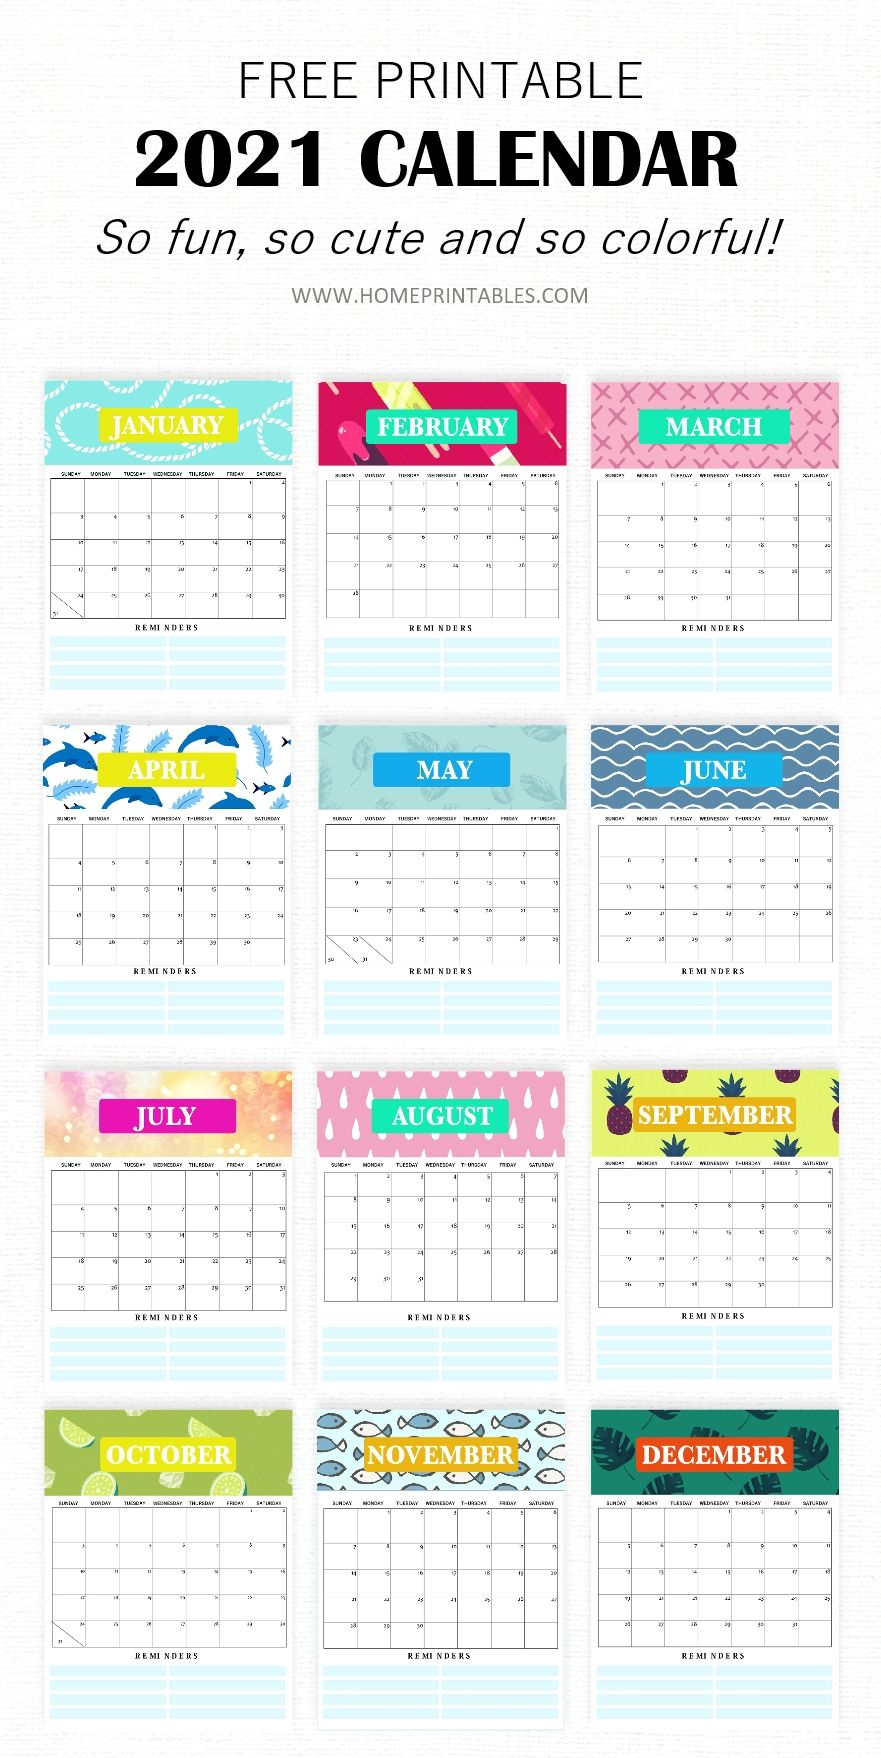 Free Monthly Calendar 2021 Printable: Super Cute Style! In